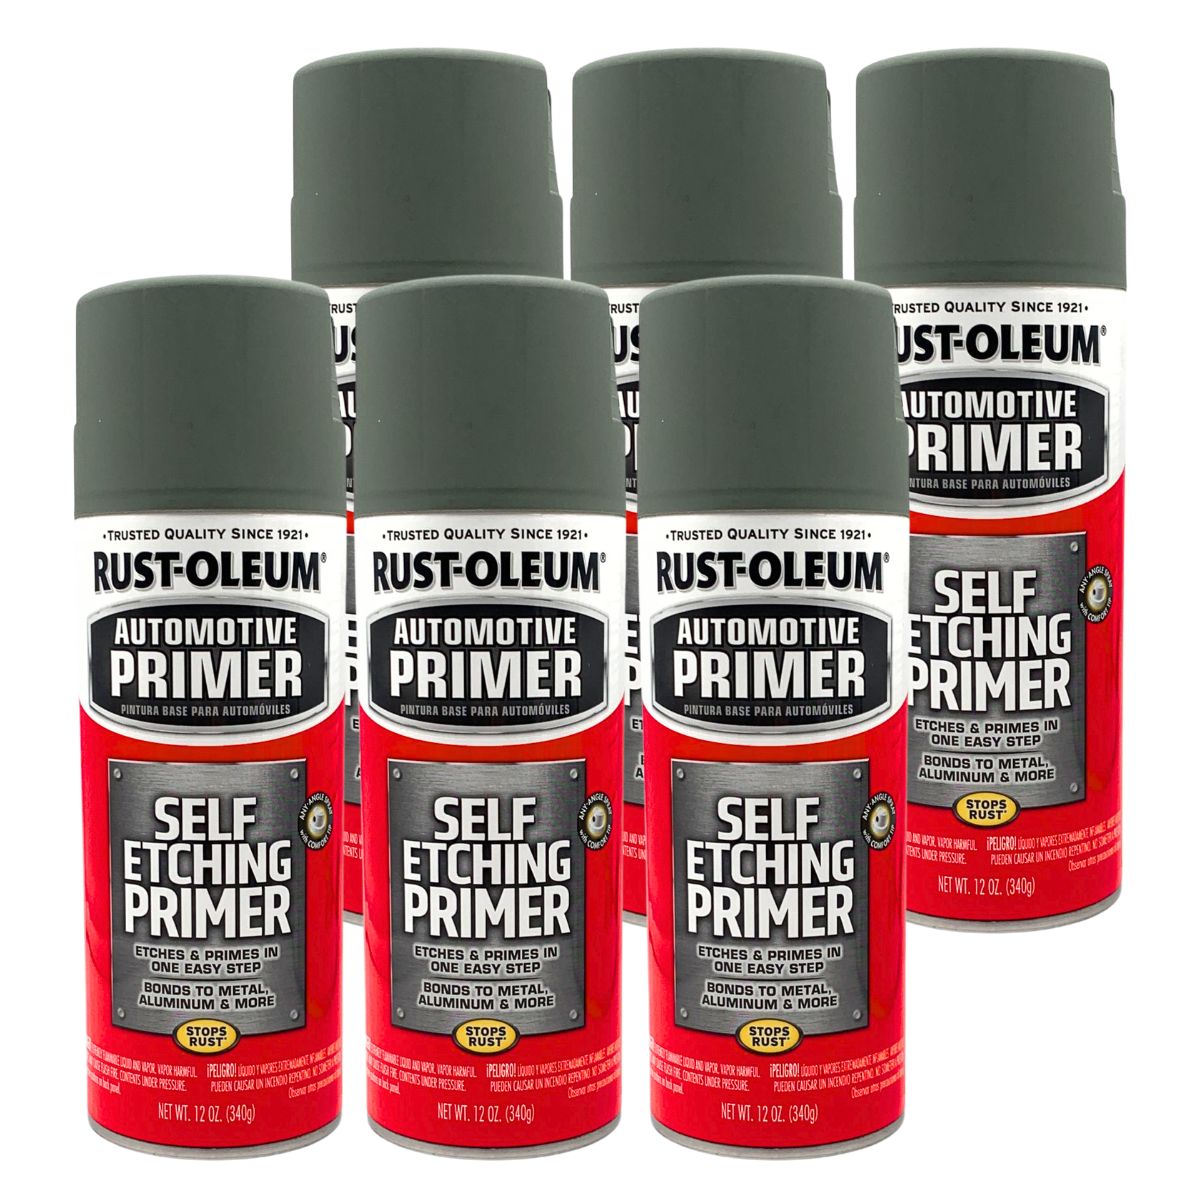 (6 PACK) - Rust-oleum Automotive Self Etching Primer 249322 - Dark Green - 340g Spray - South East Clearance Centre